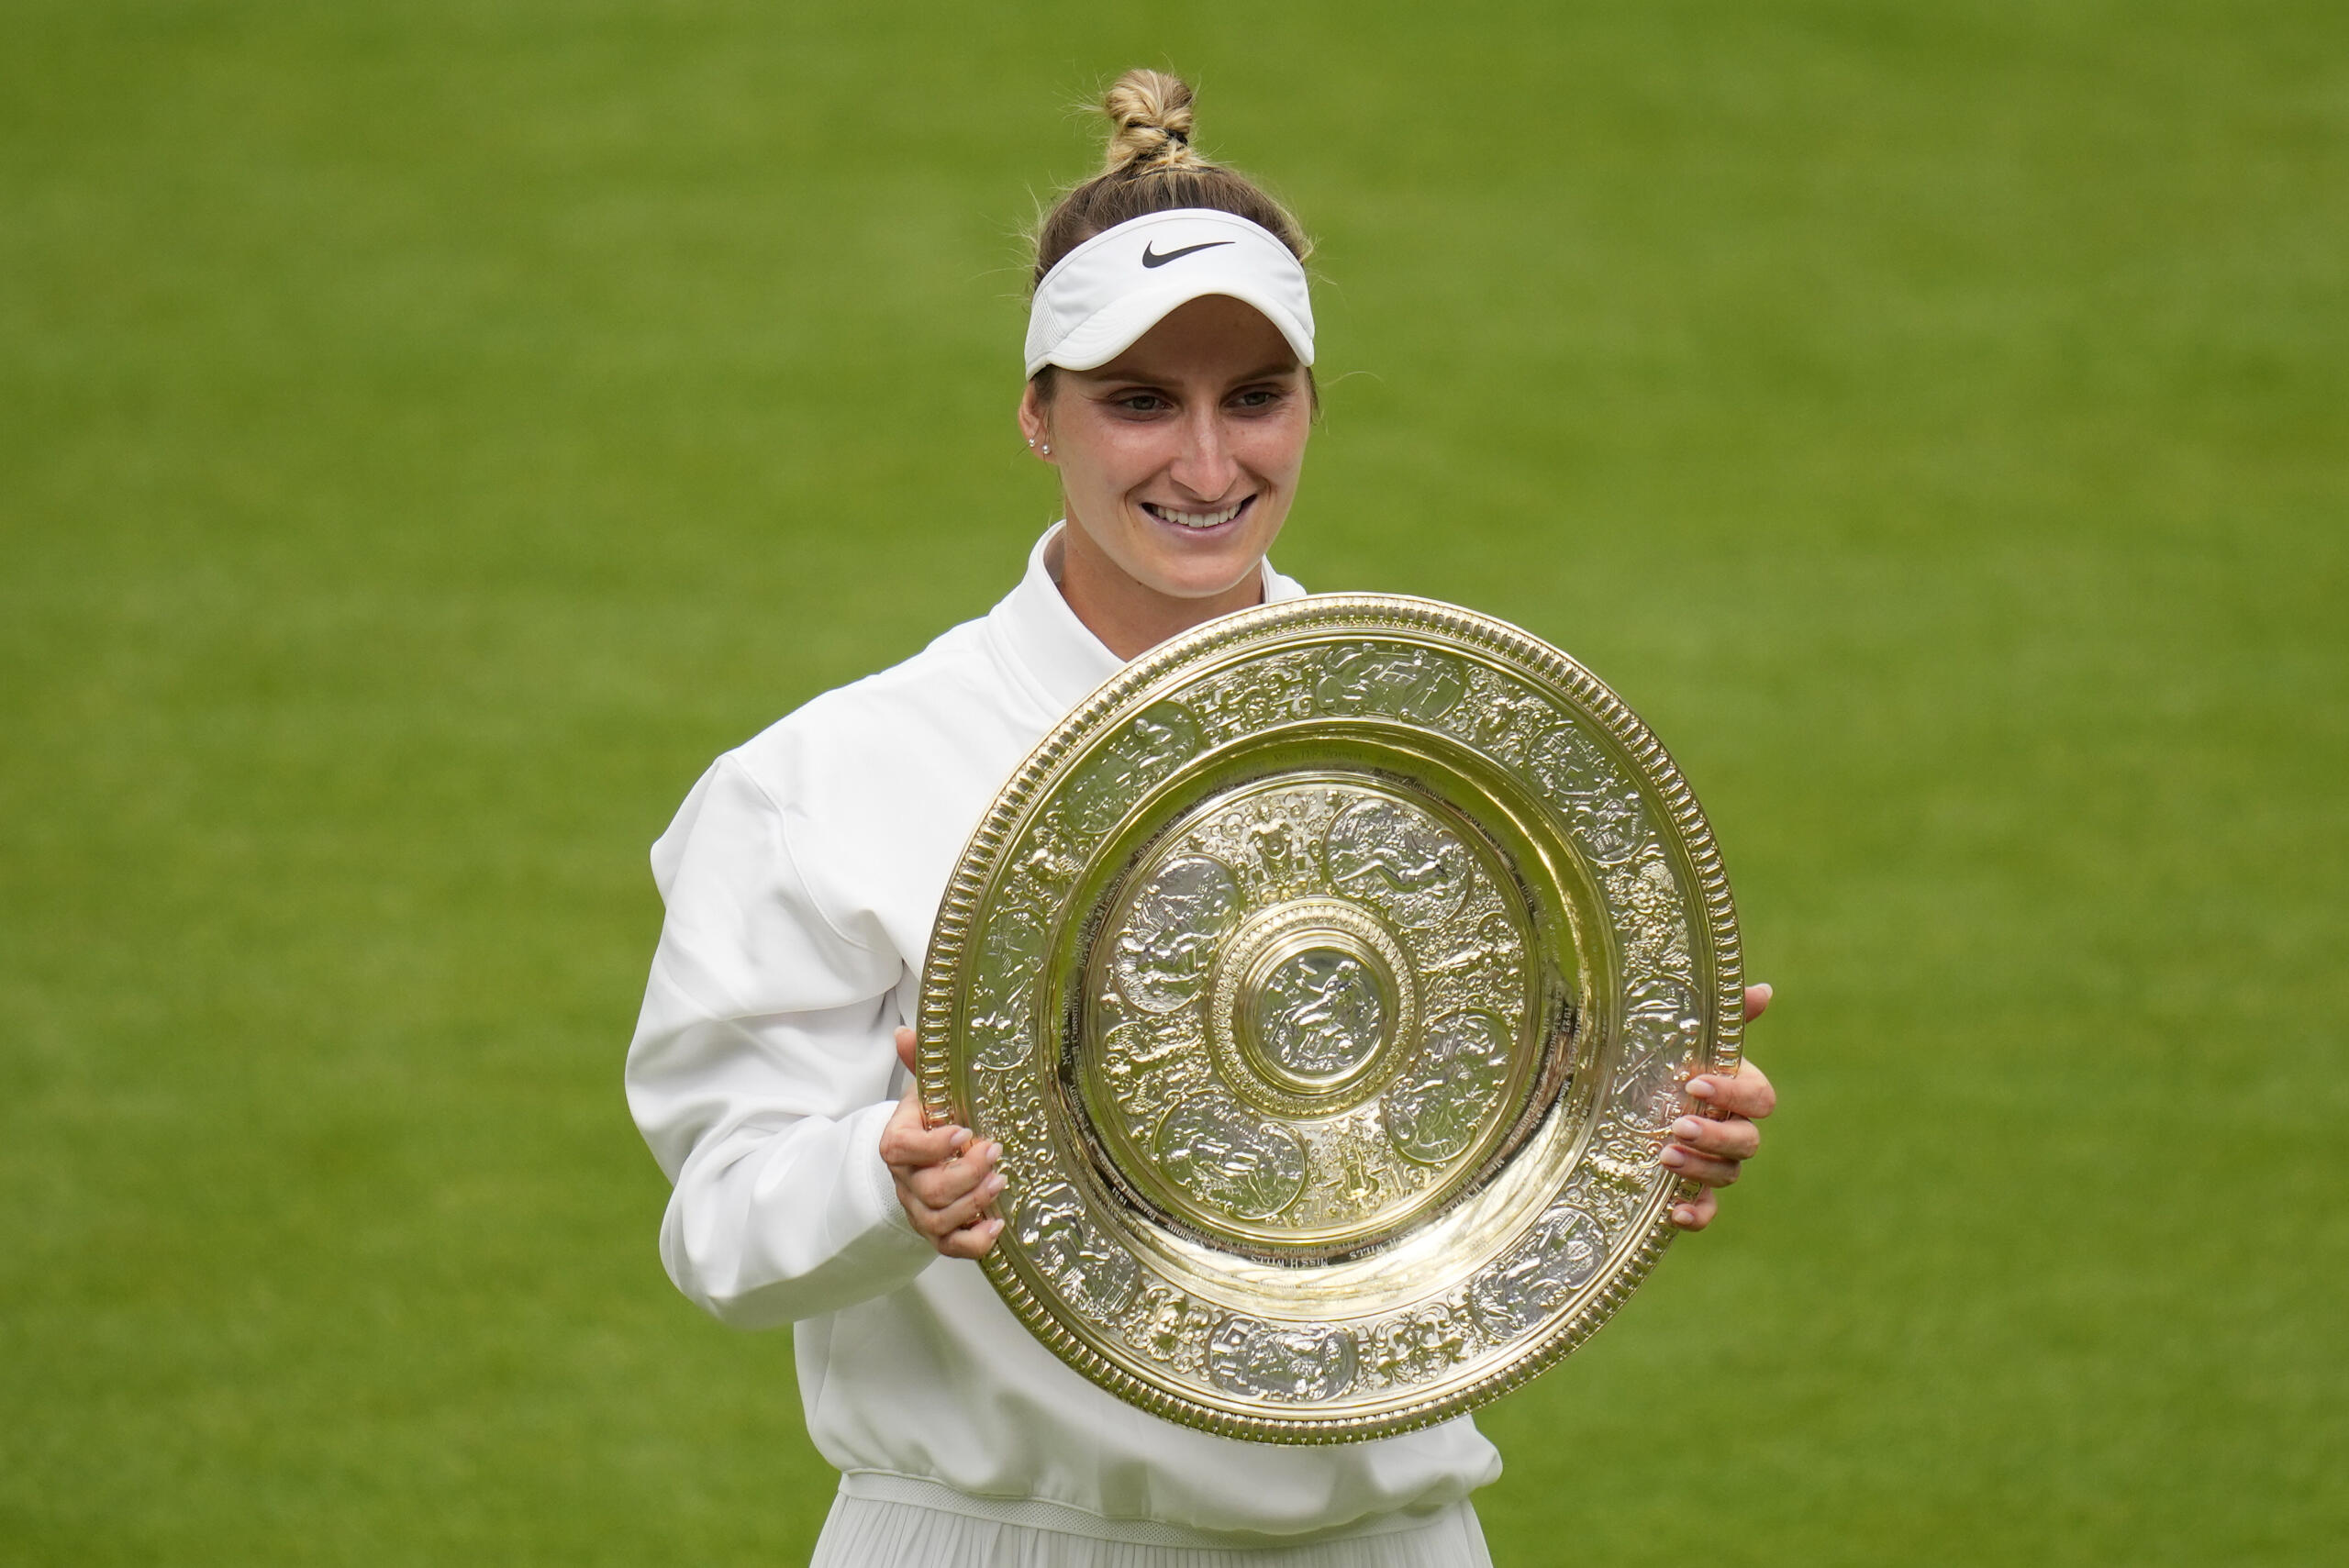 Czech Republic's Marketa Vondrousova celebrates with the trophy after beating Tunisia's Ons Jabeur to win the final of the women's singles on day thirteen of the Wimbledon tennis championships in London, Saturday, July 15, 2023.